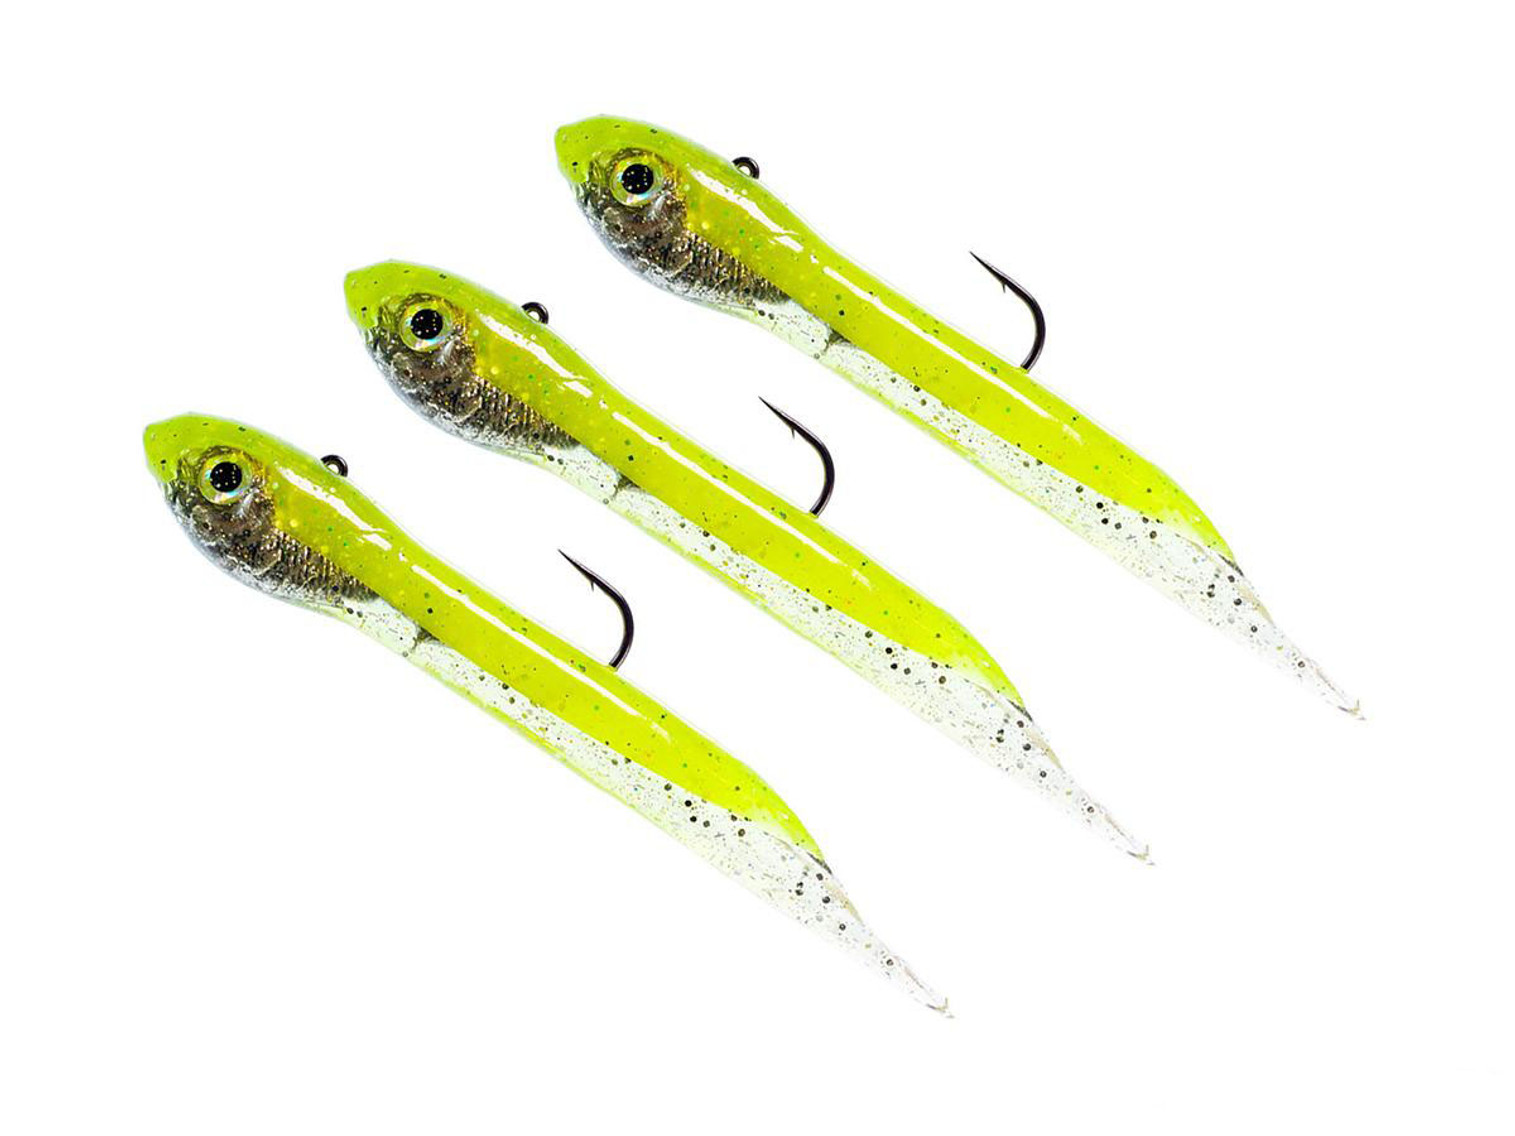 Hook Up Baits Handcrafted Soft Fishing Jigs - Glow Green Silver / 2" / 1/16 oz